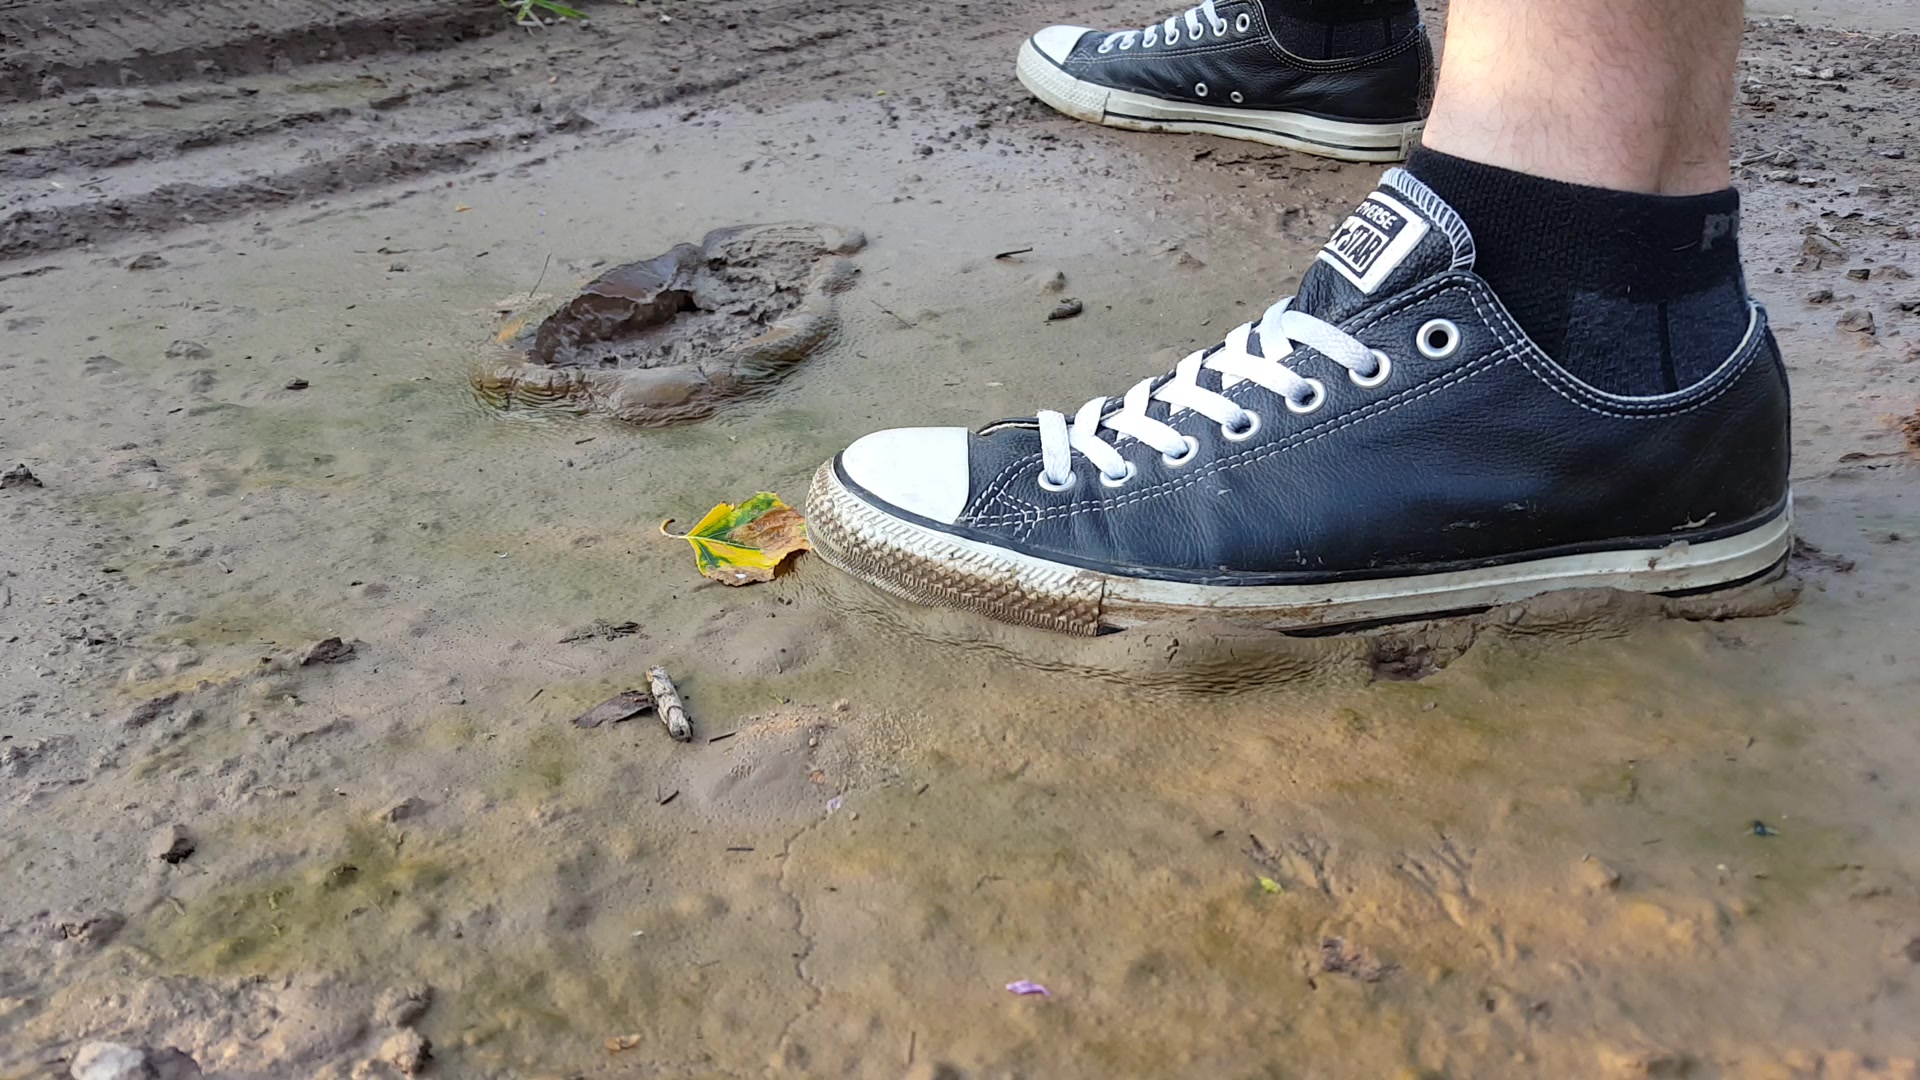 Leather Converse in Mud